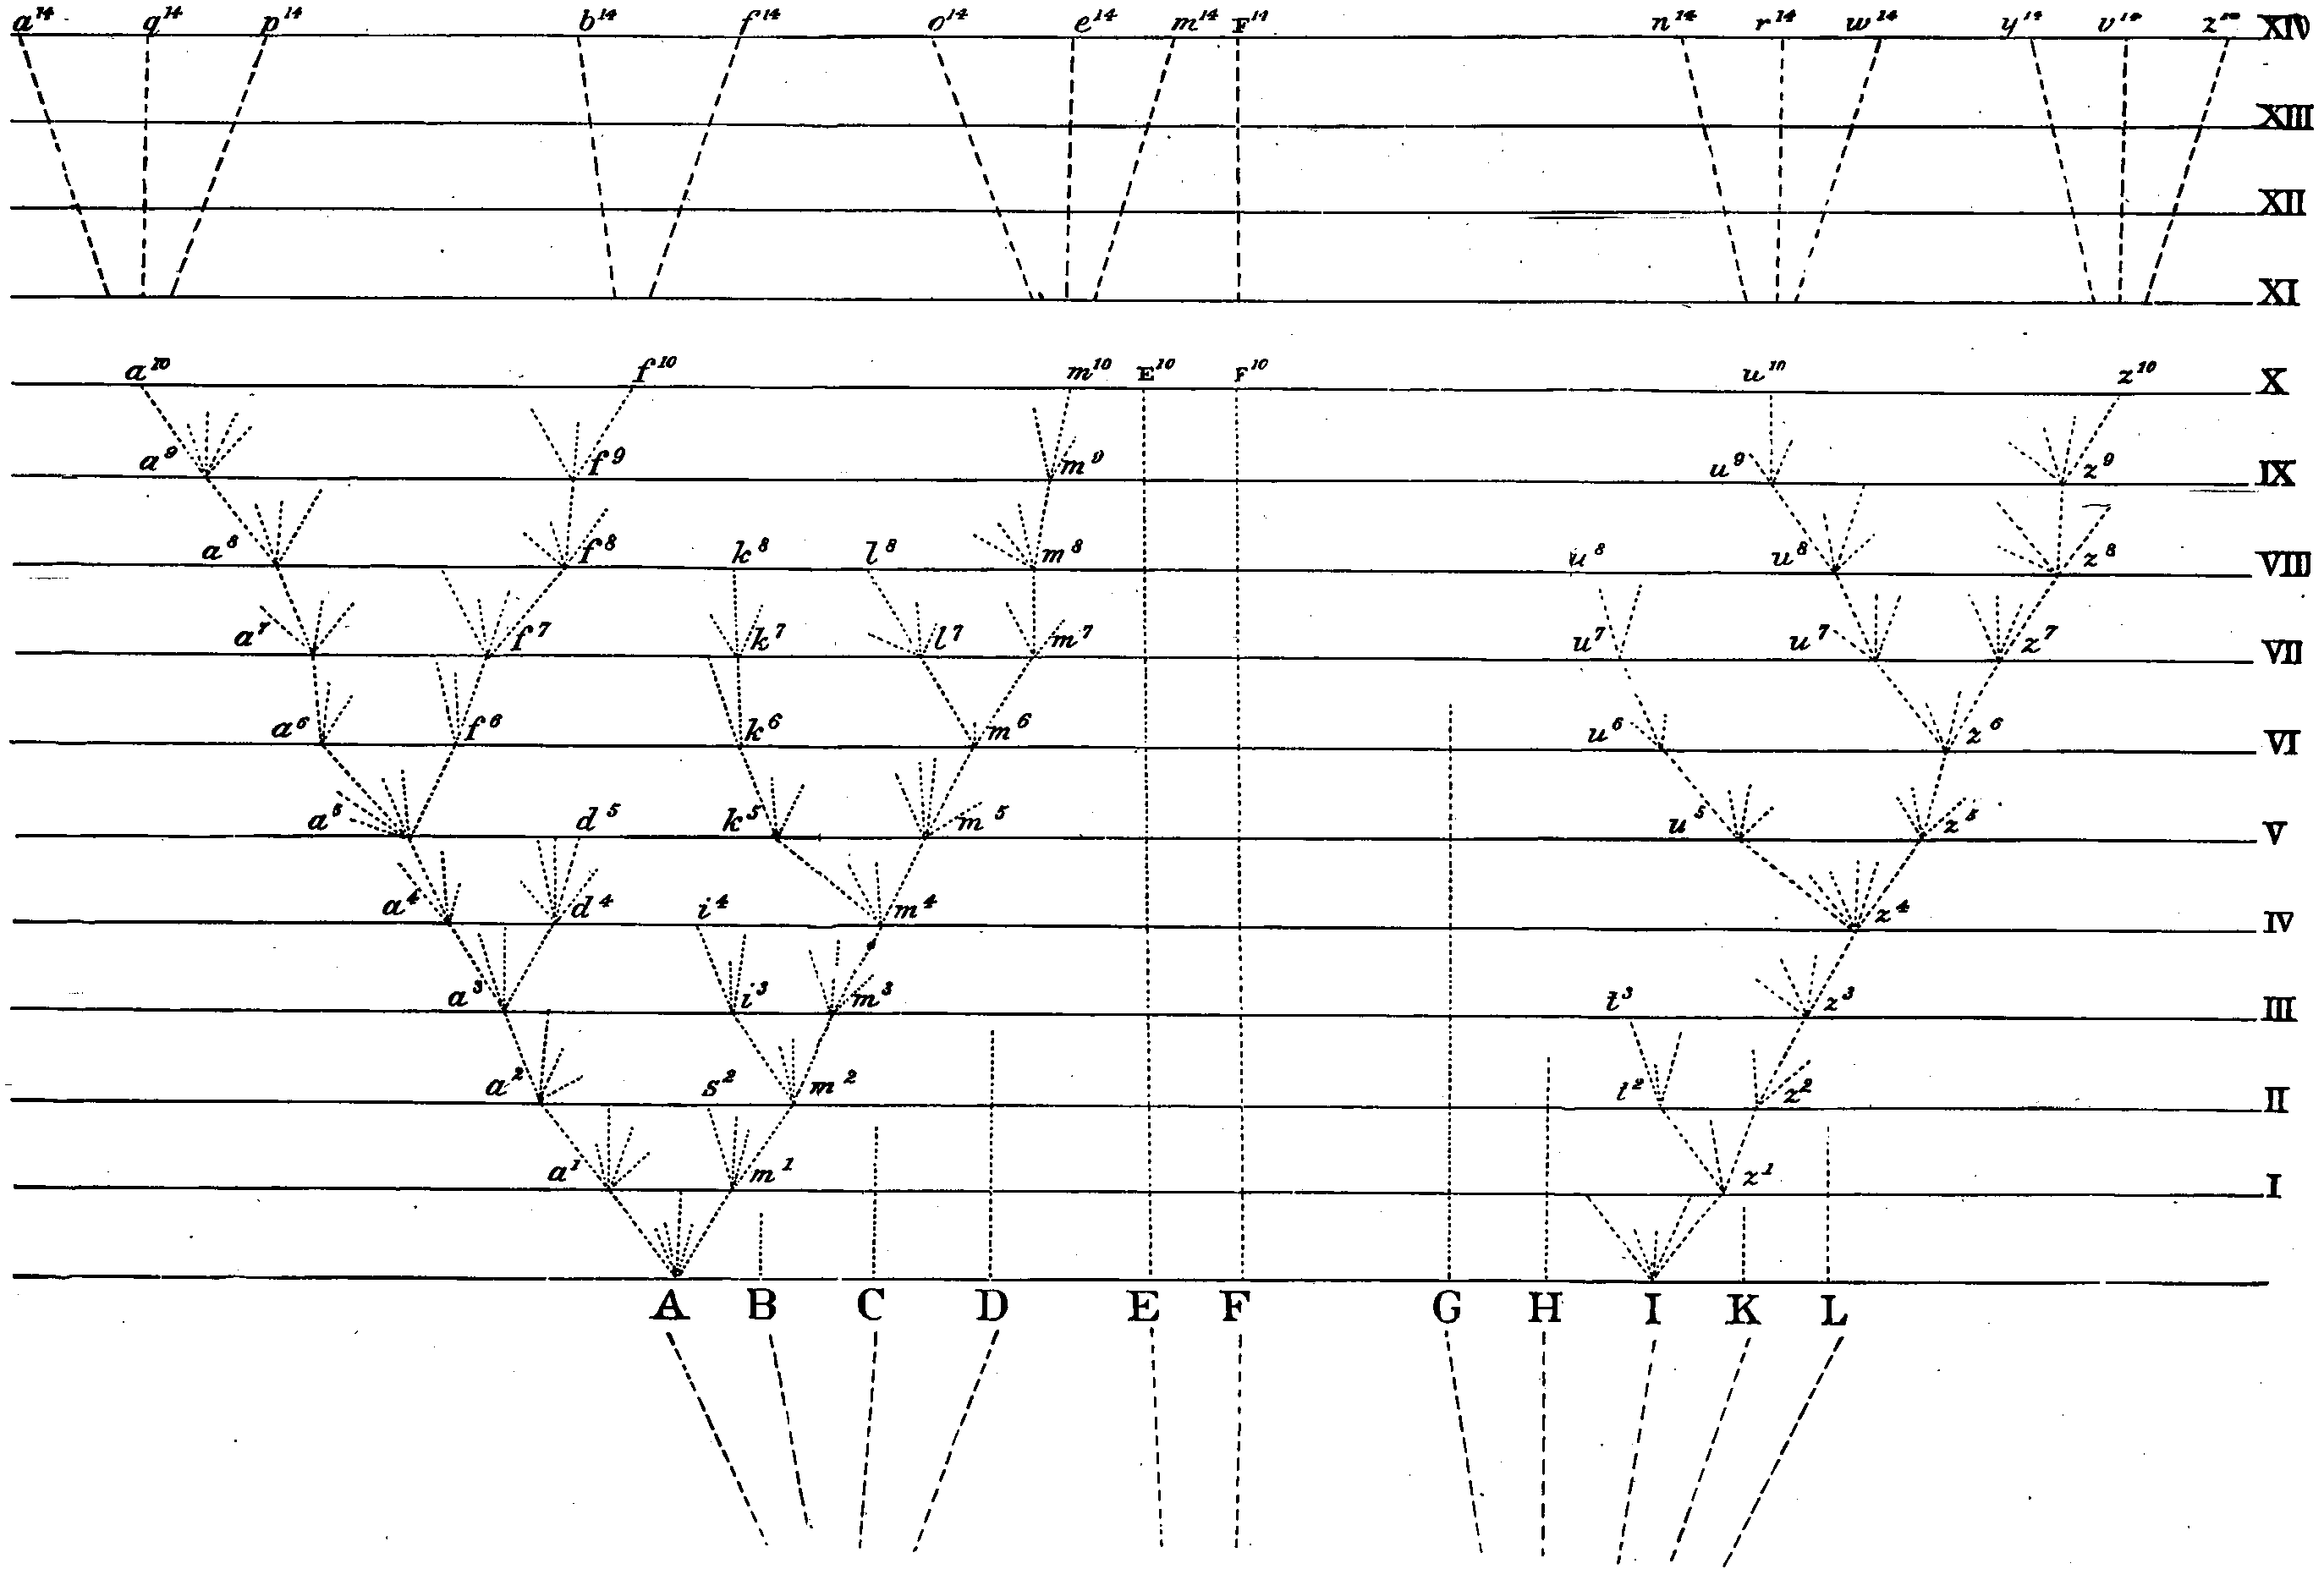 Graph labeled on the horizontal-axis with the letters A to L and on the vertical-axis with Roman numerals I to XIV. From A branch up several dashed lines; all but two stop before reaching vertical-level I; from those two branch up several more dashed lines, some stop before the next vertical-level those that don't sprout up more lines, repeat though in some cases no line from a particular branch reaches the next vertical-level. Further description in the text following.